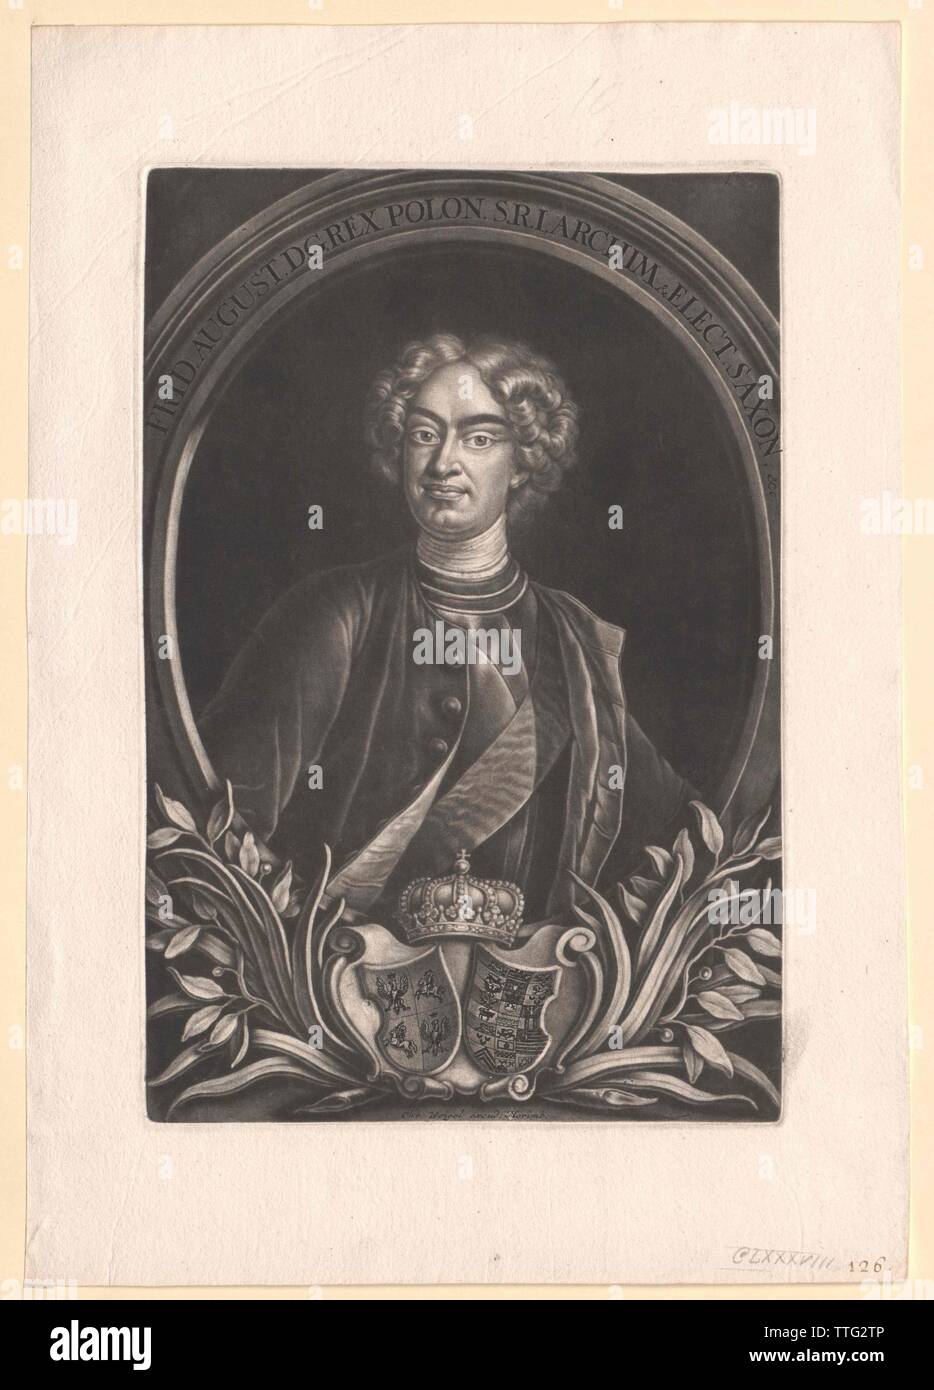 Frederick August I, Elector of Saxony, Additional-Rights-Clearance-Info-Not-Available Stock Photo